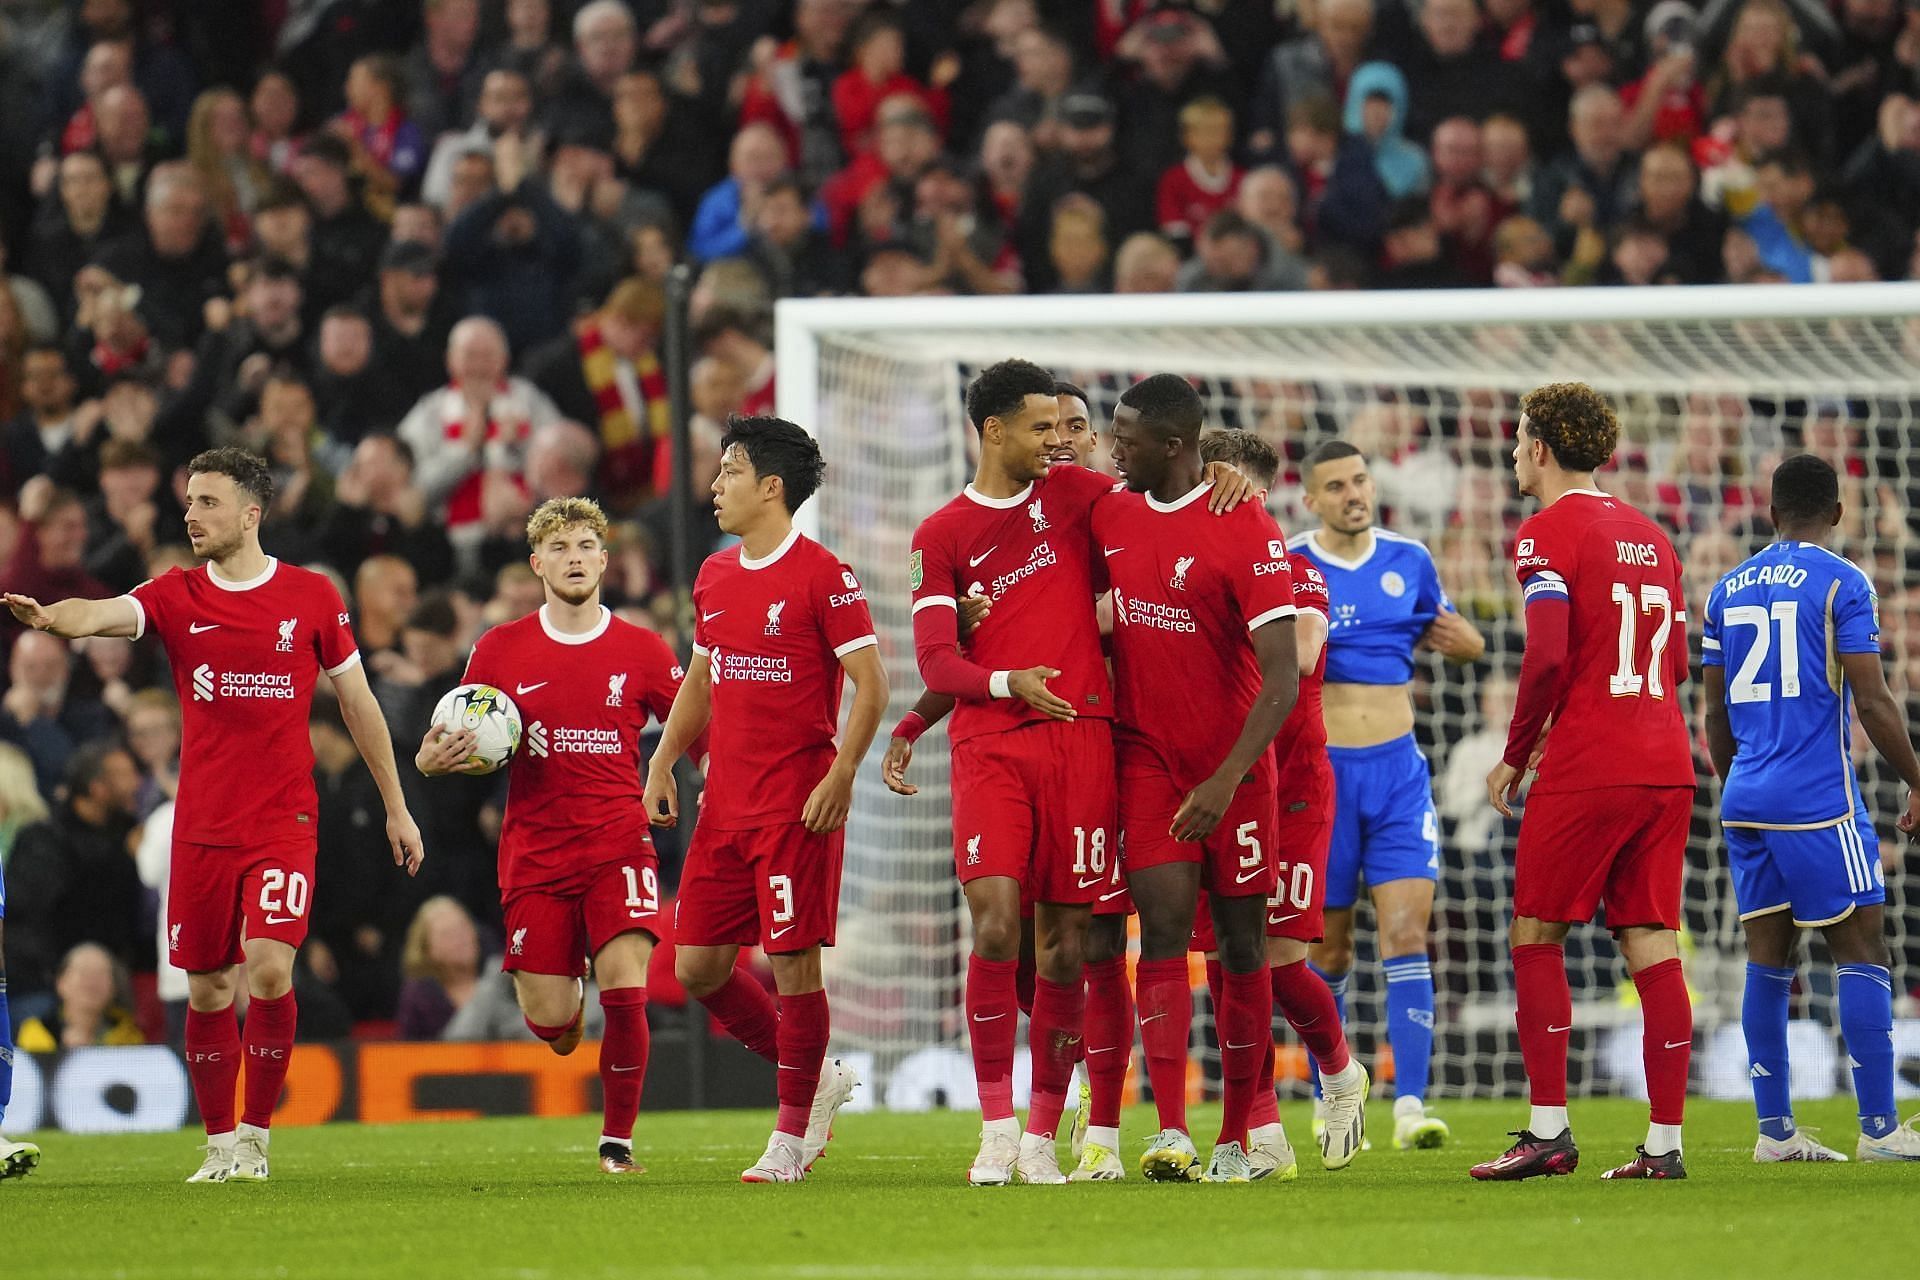 Liverpool beat Leicester 3-1 in the third round of the Carabao Cup after going 1-0 down.